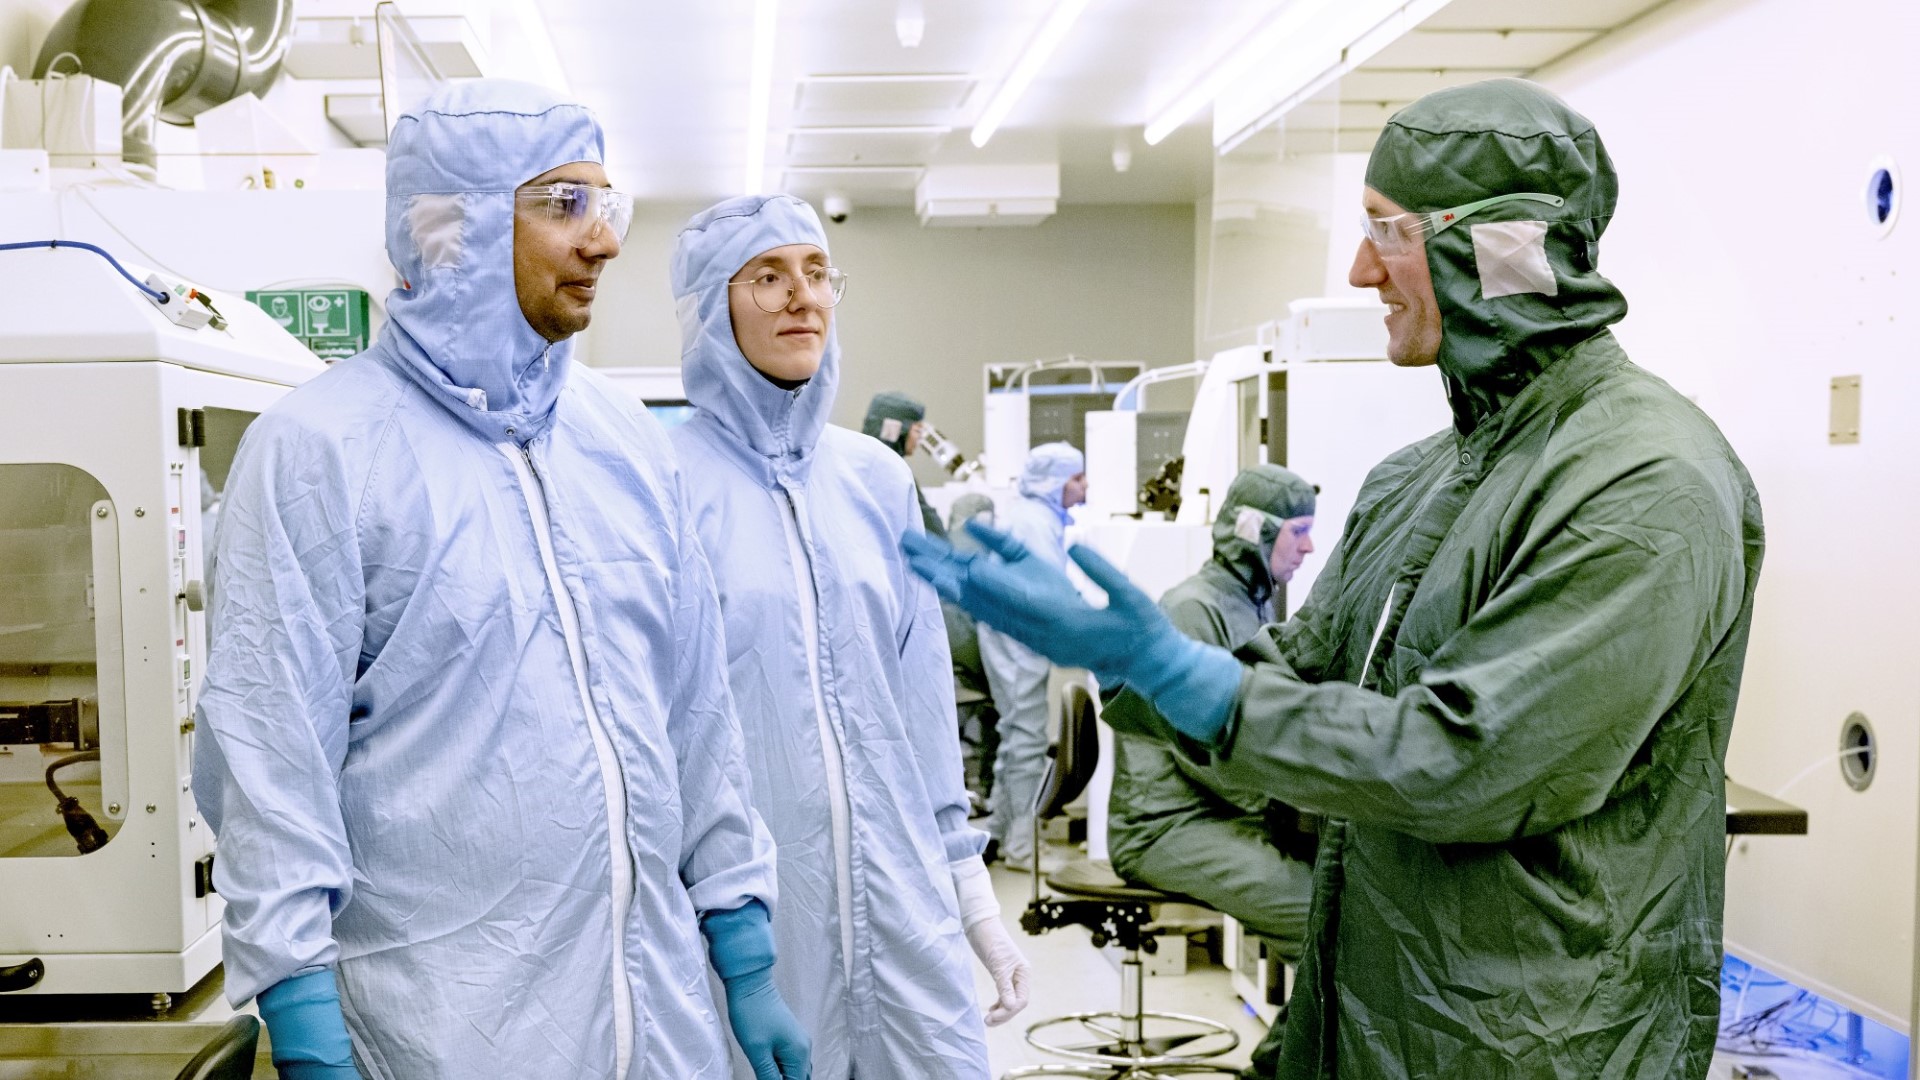 dtu nanolab cleanroom collaboration with external companies